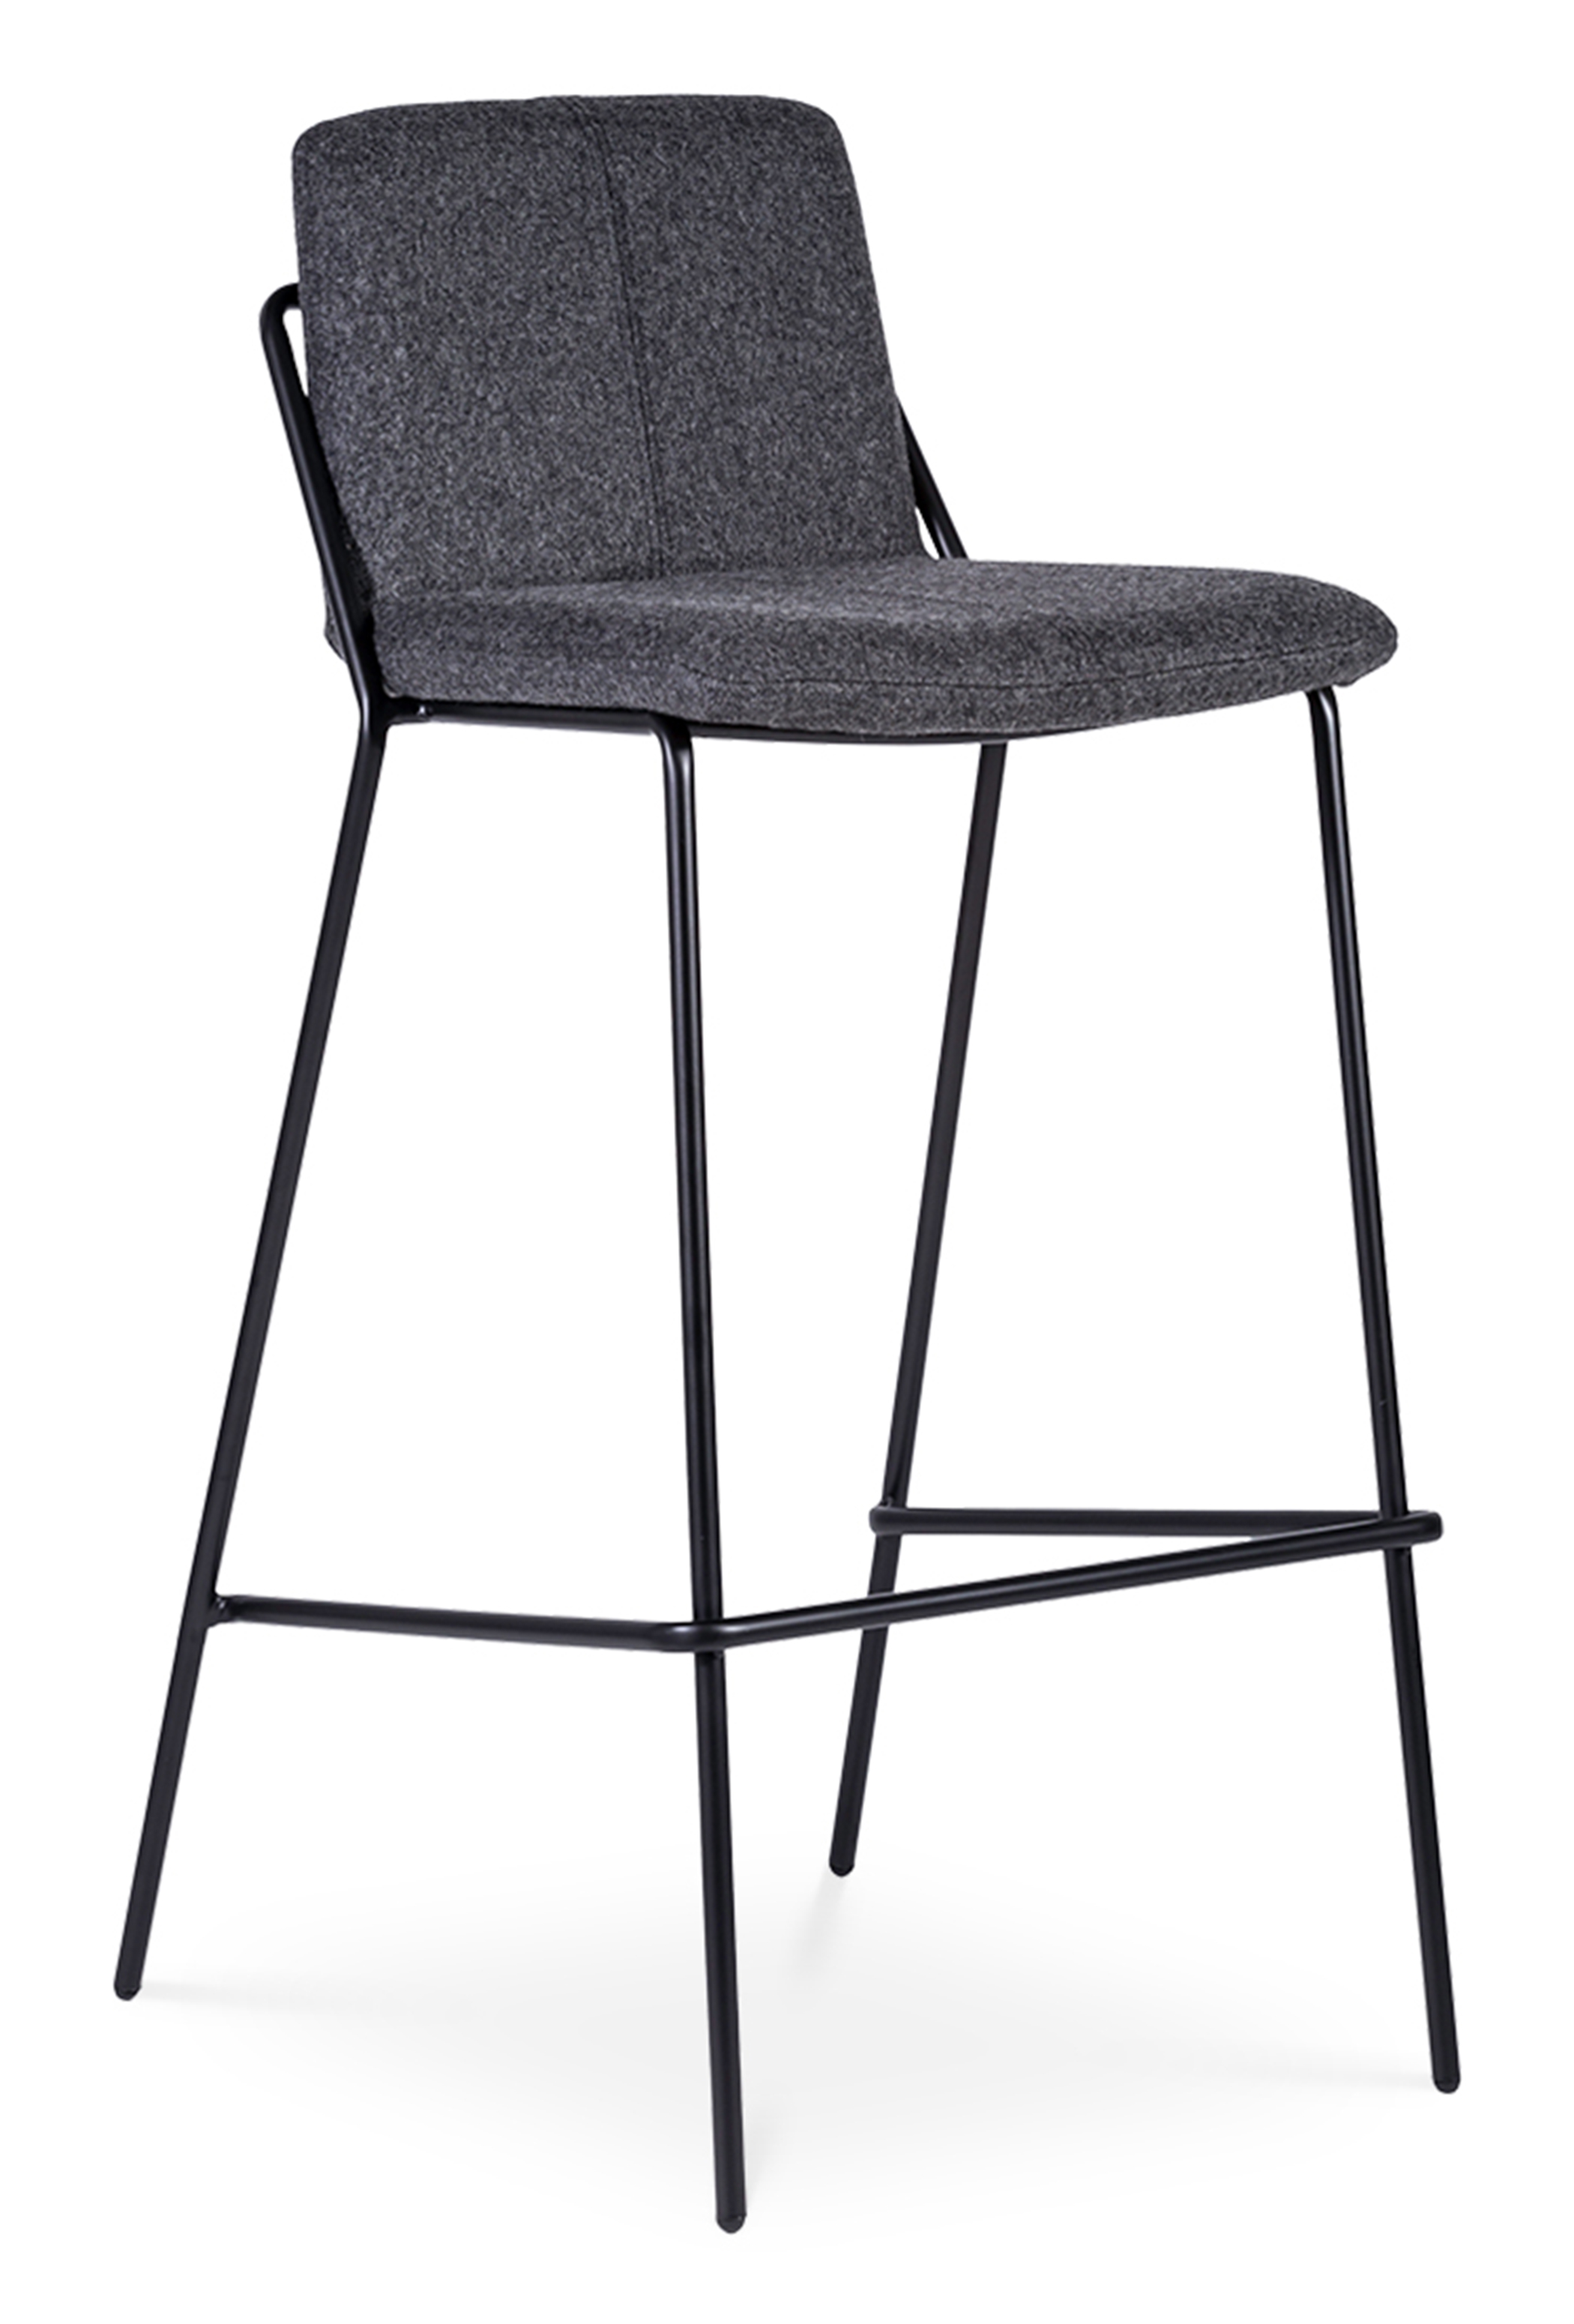 WS - Sling high stool - Upholstered dark grey (Front angle)